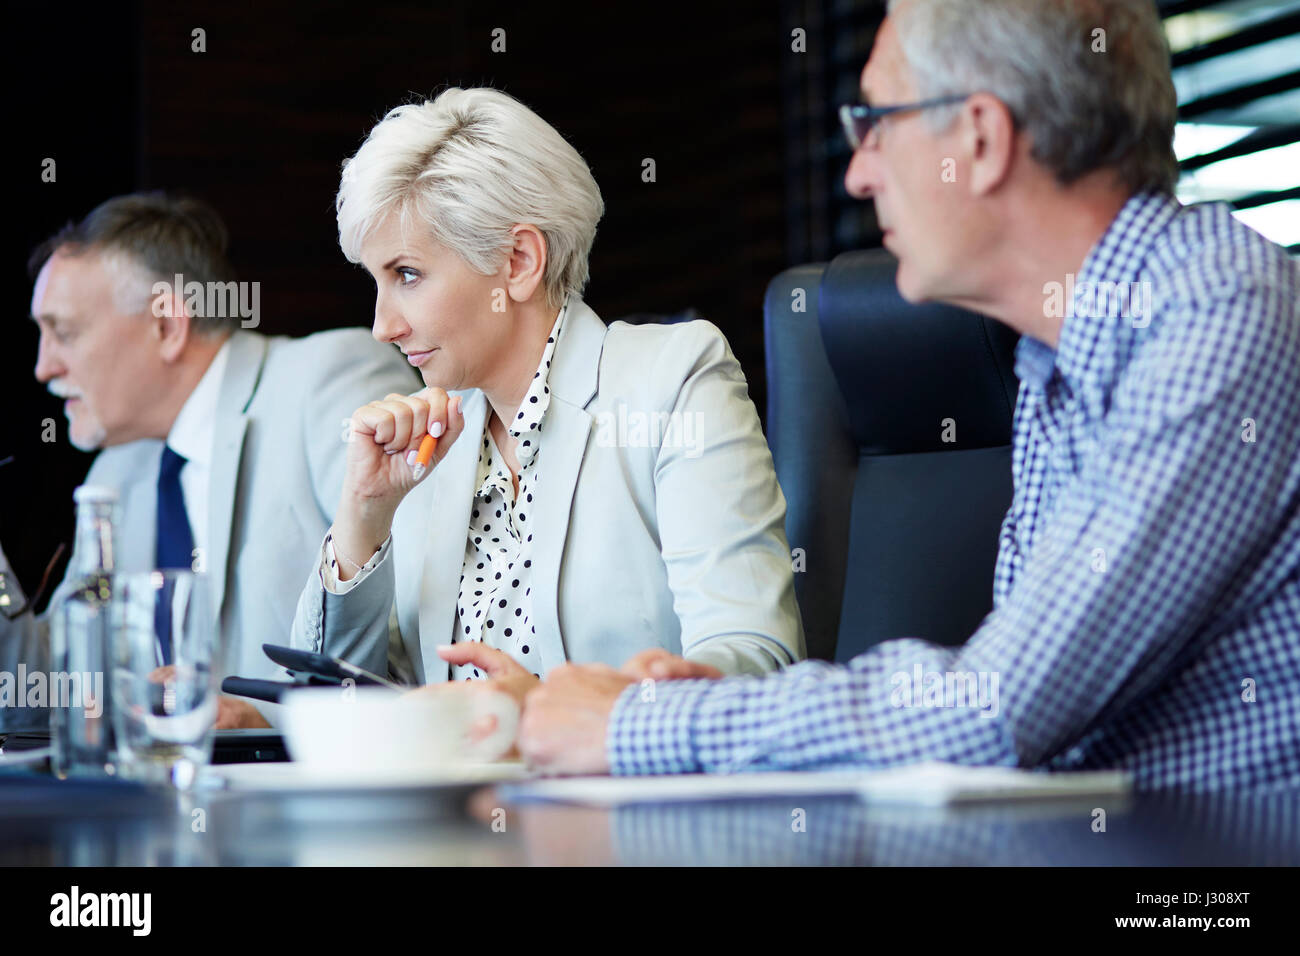 Coworkers carefully listening to presentation Stock Photo